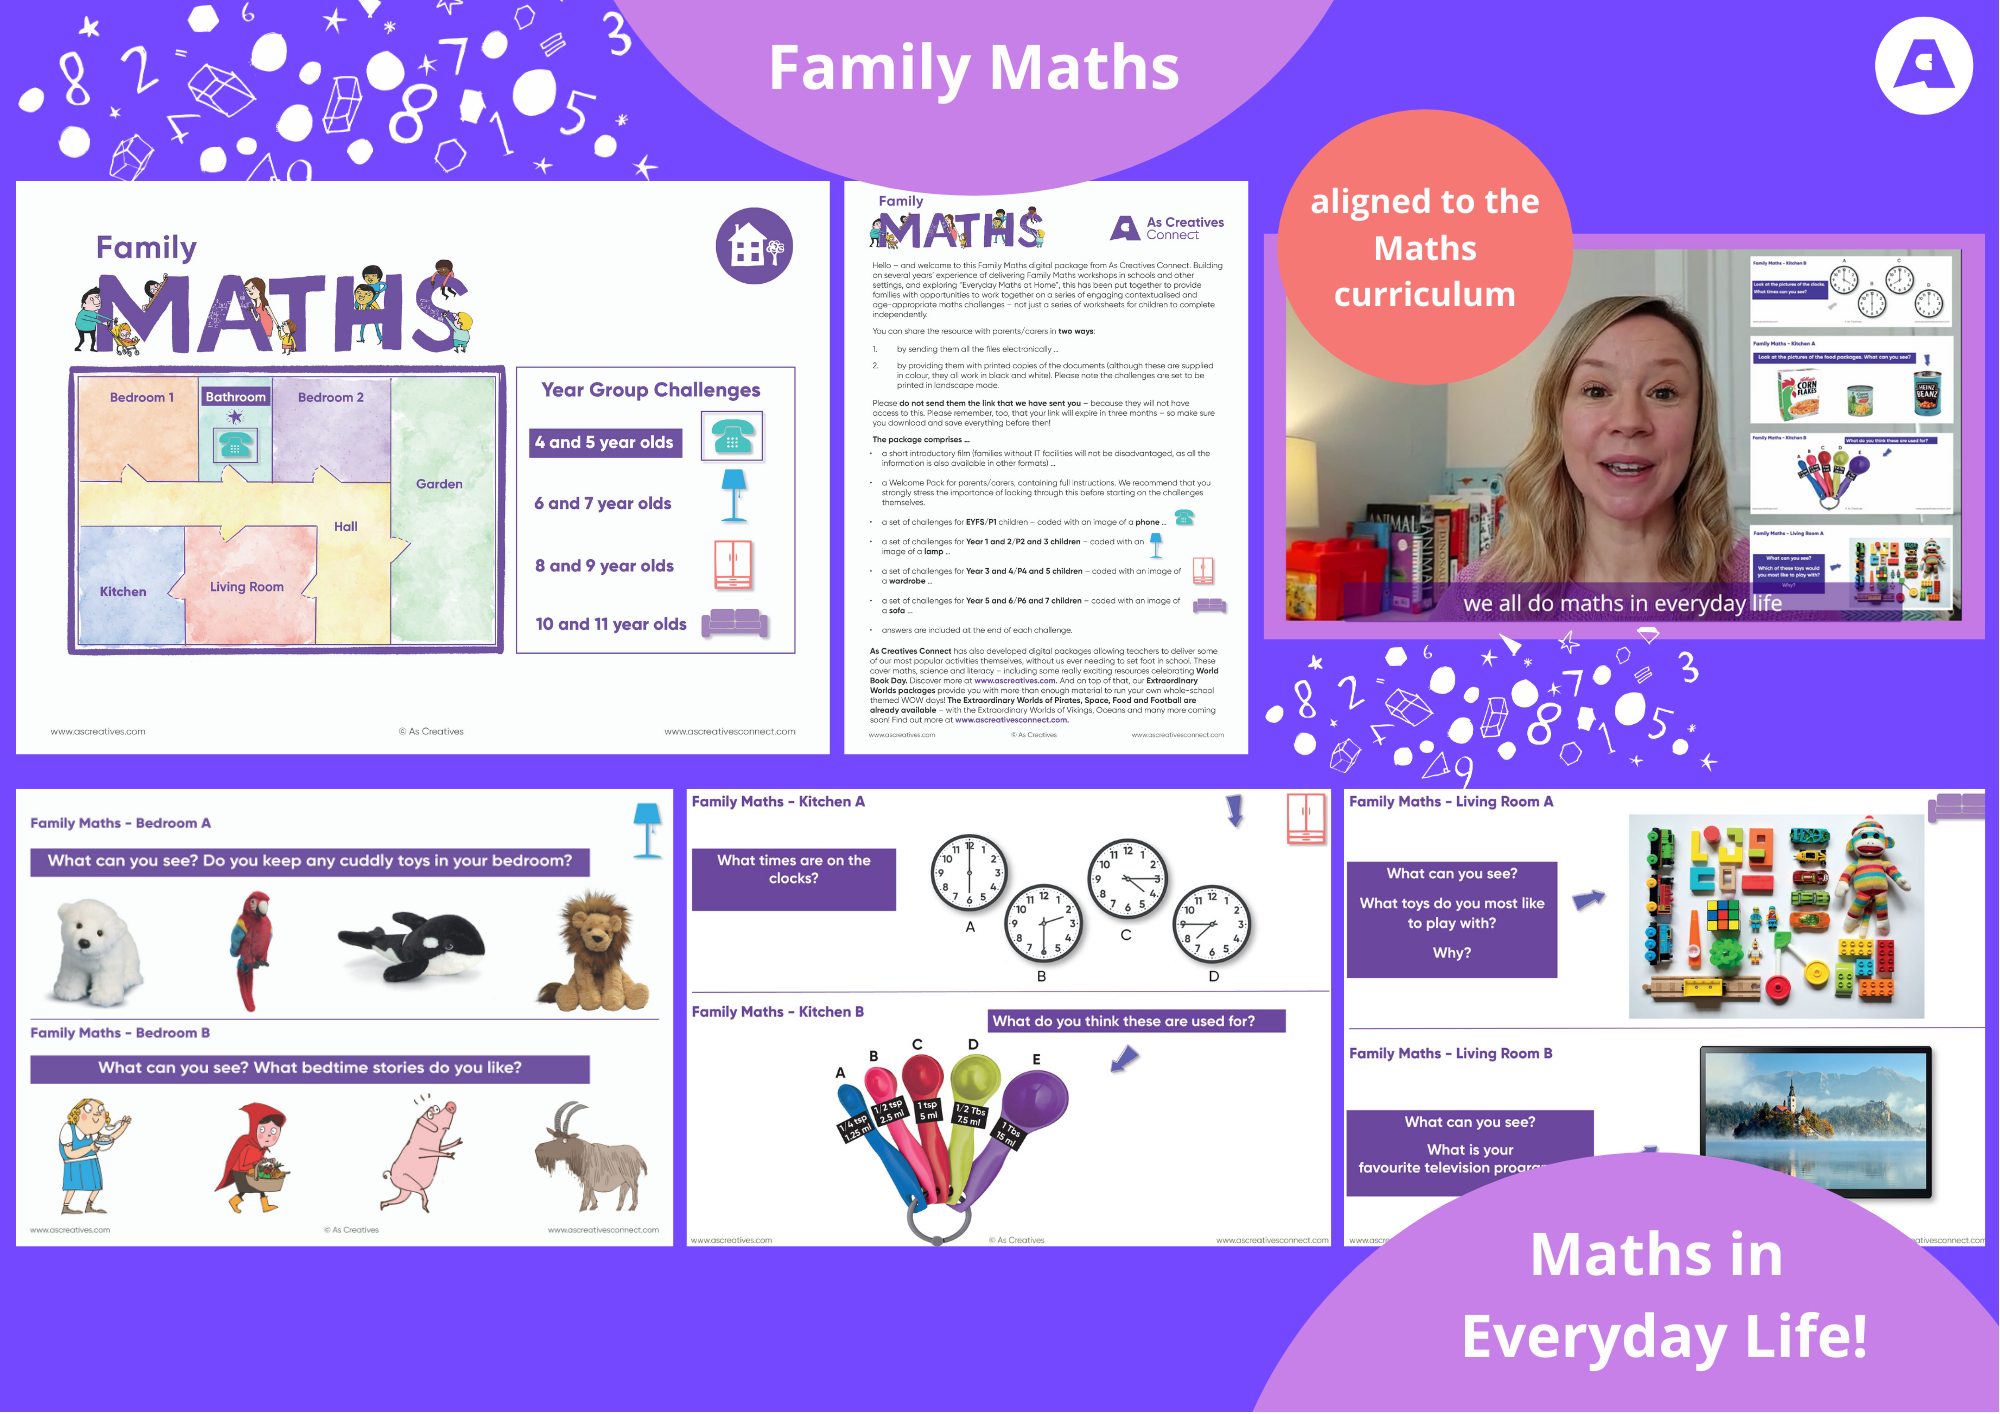 Family Maths Workshops – A Creative Approach to Securing Parental Support for Maths Priorities